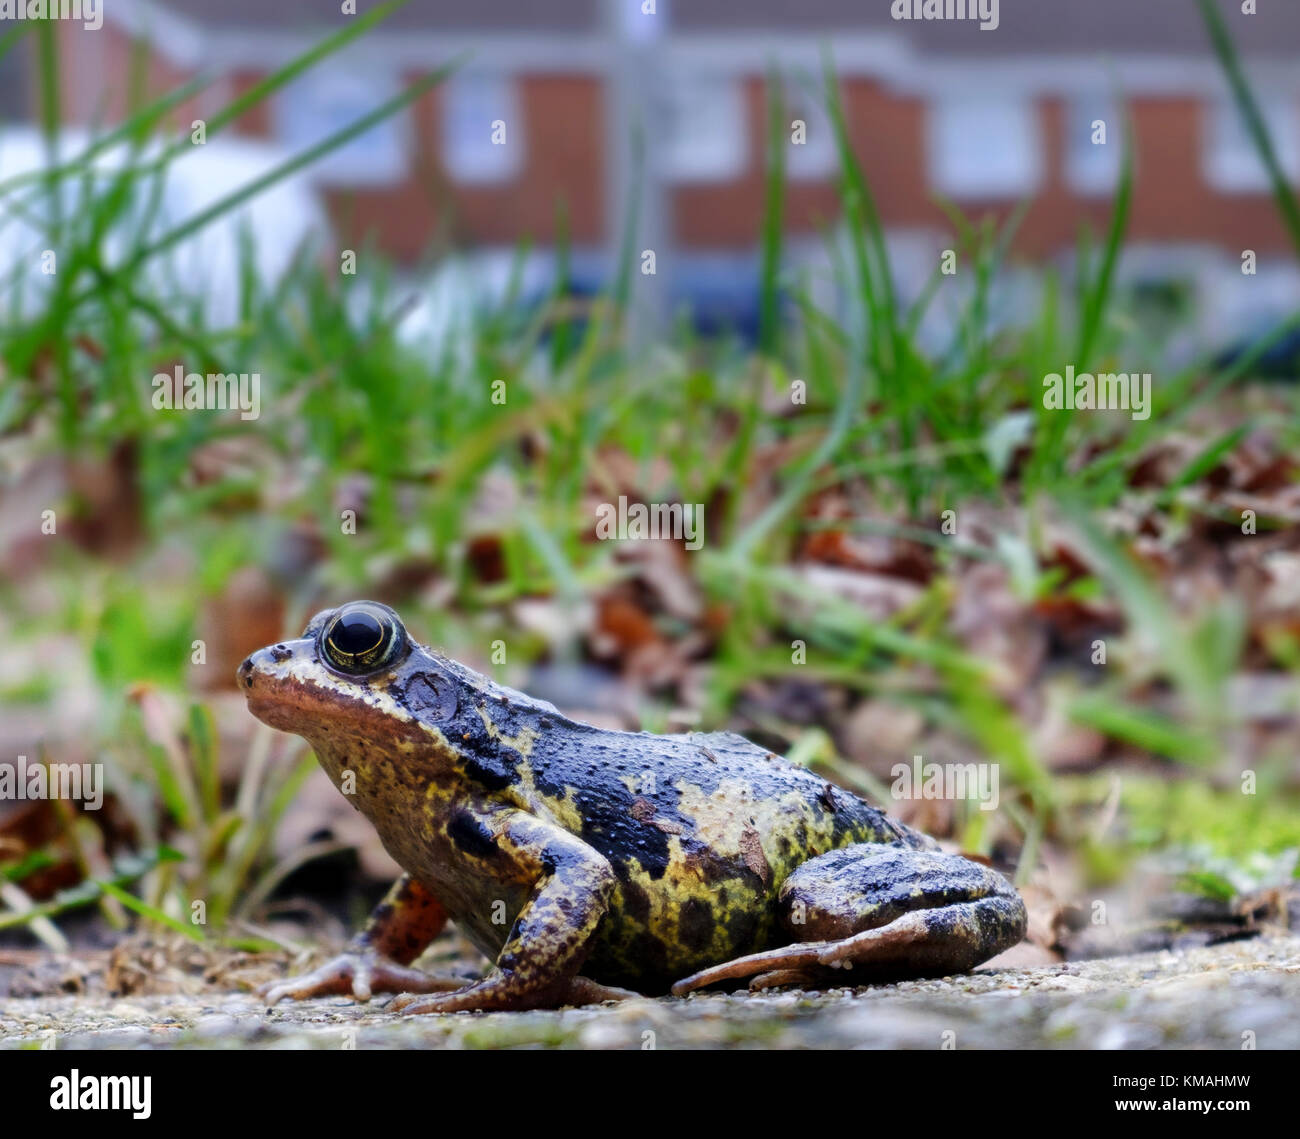 Common frog on the garden path. Stock Photo